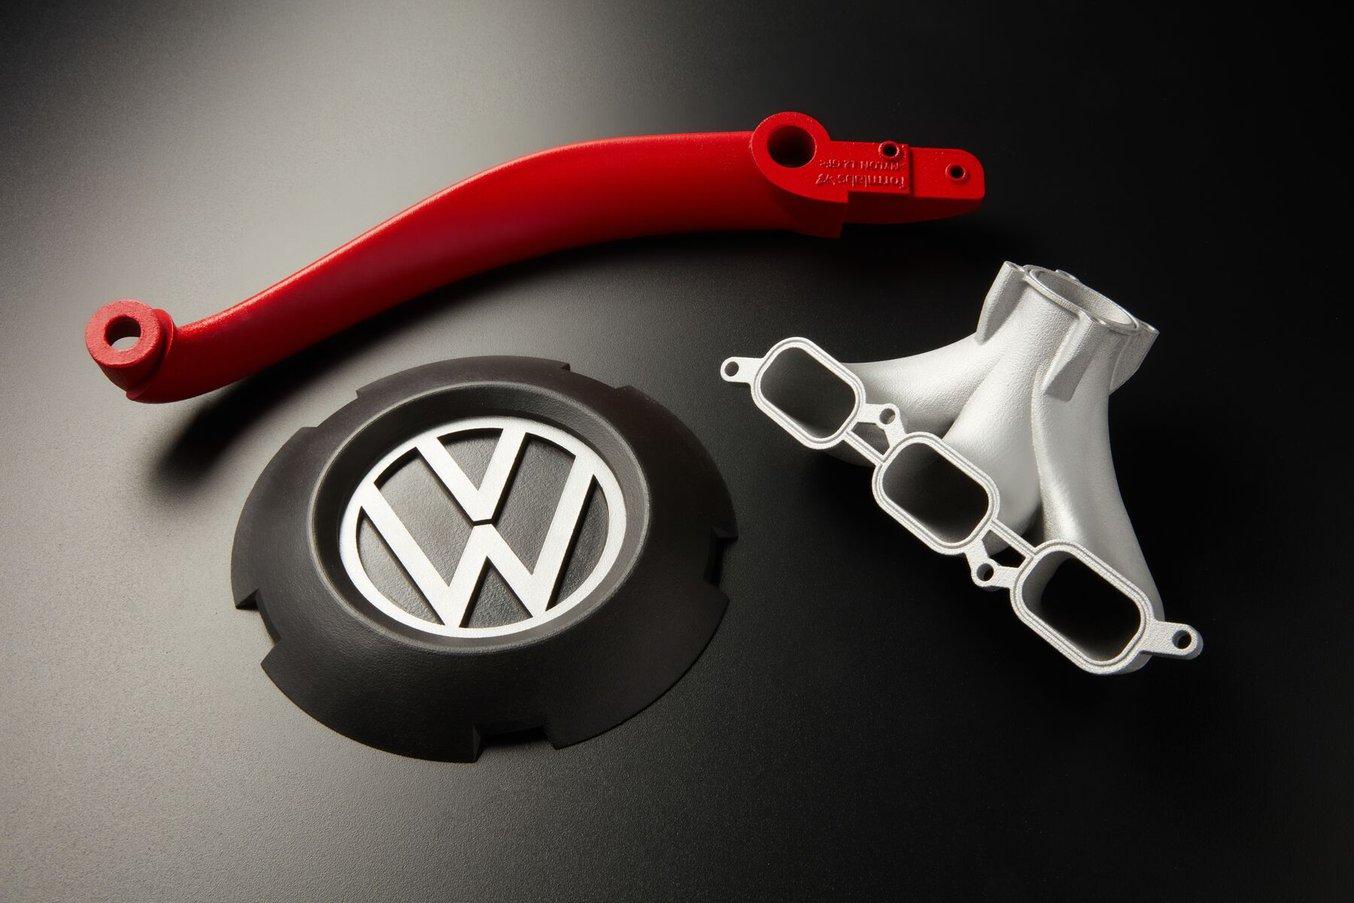 three 3D printed parts from automotive applications, cerakoted